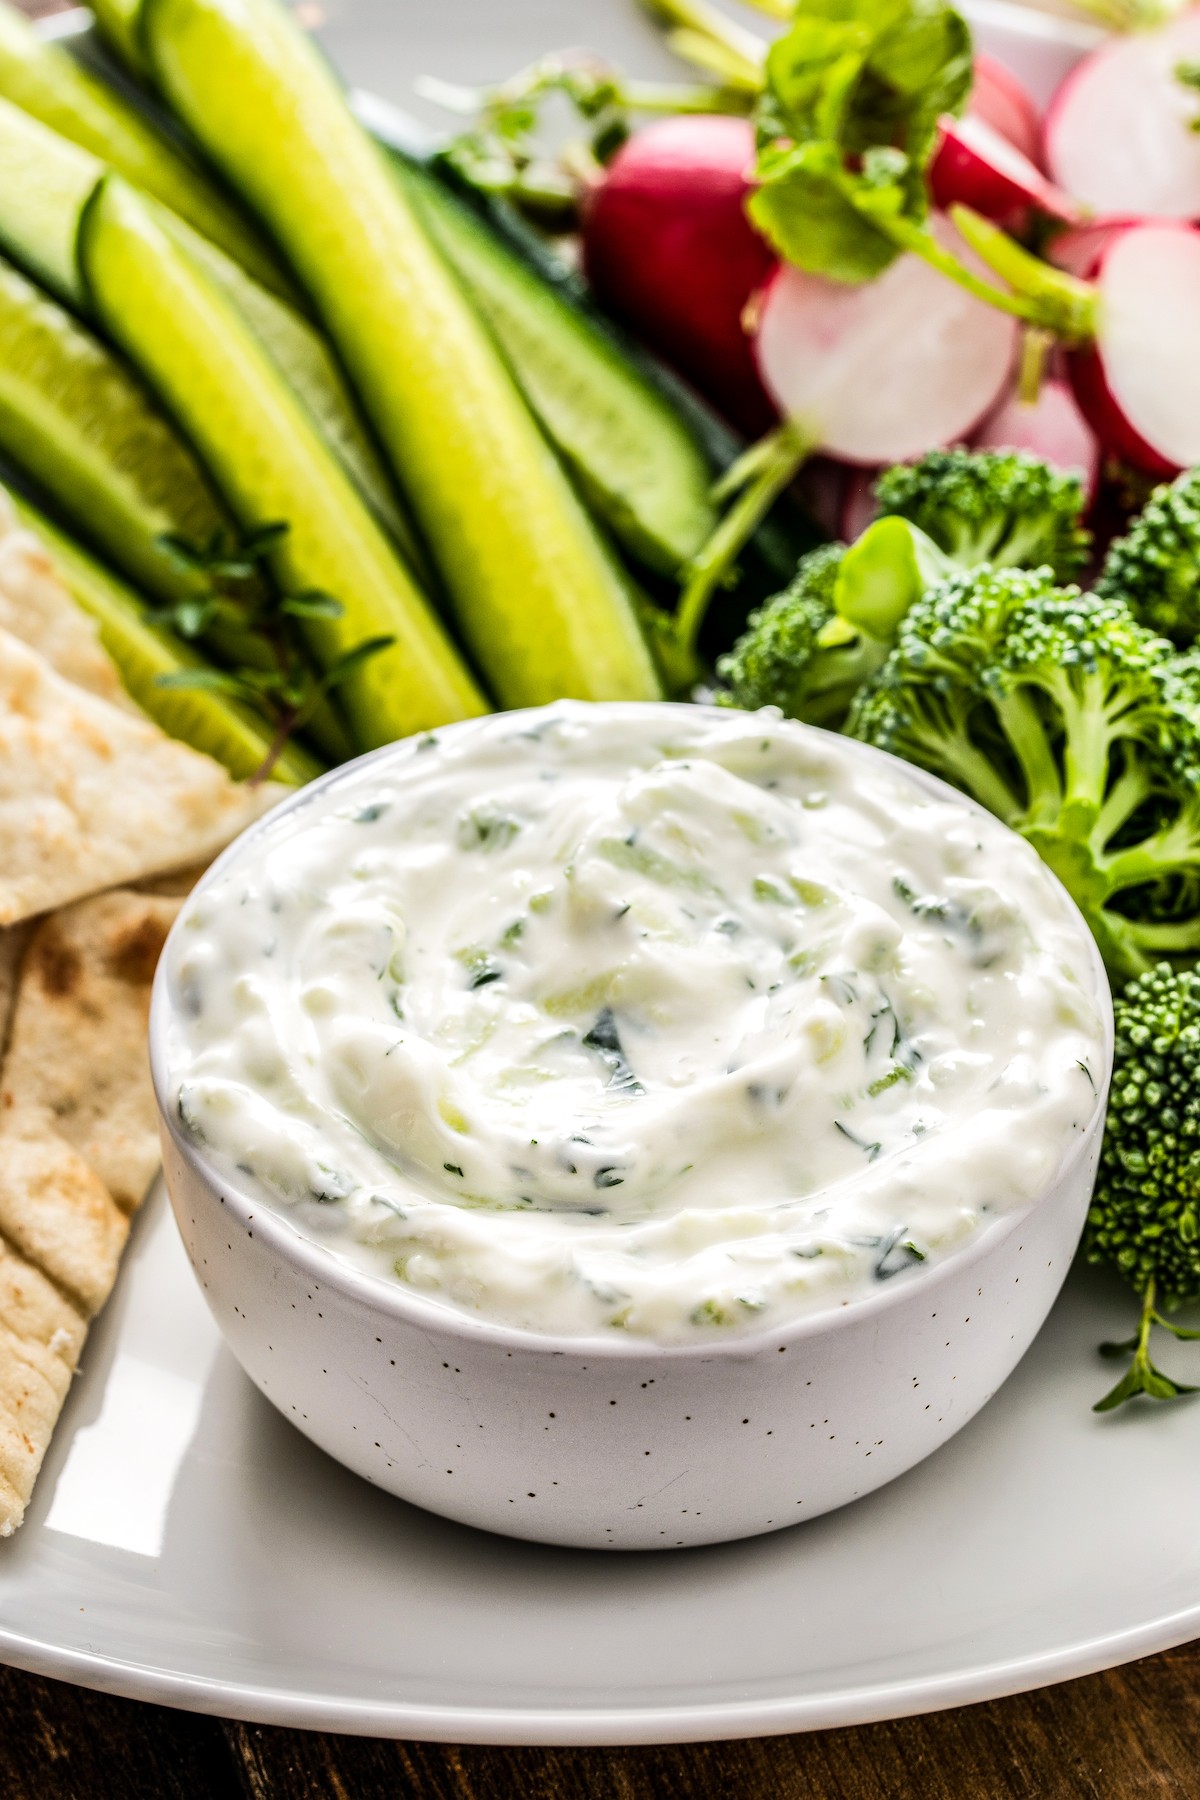 Bowl of cucumber dip with veggies on a plate.